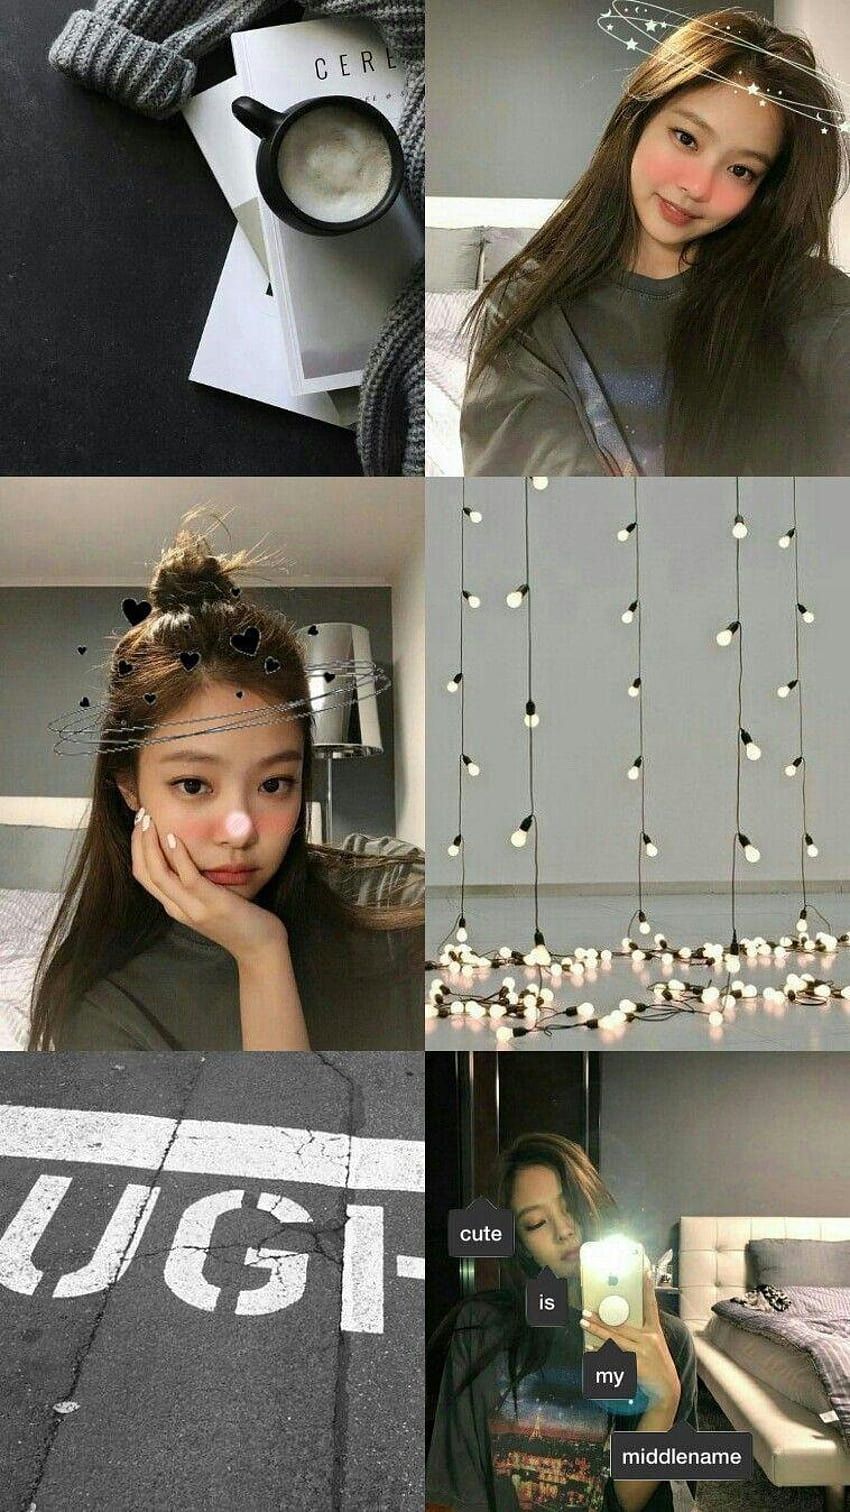 A collage of photos including a girl, coffee, lights, and a bed. - Jennie